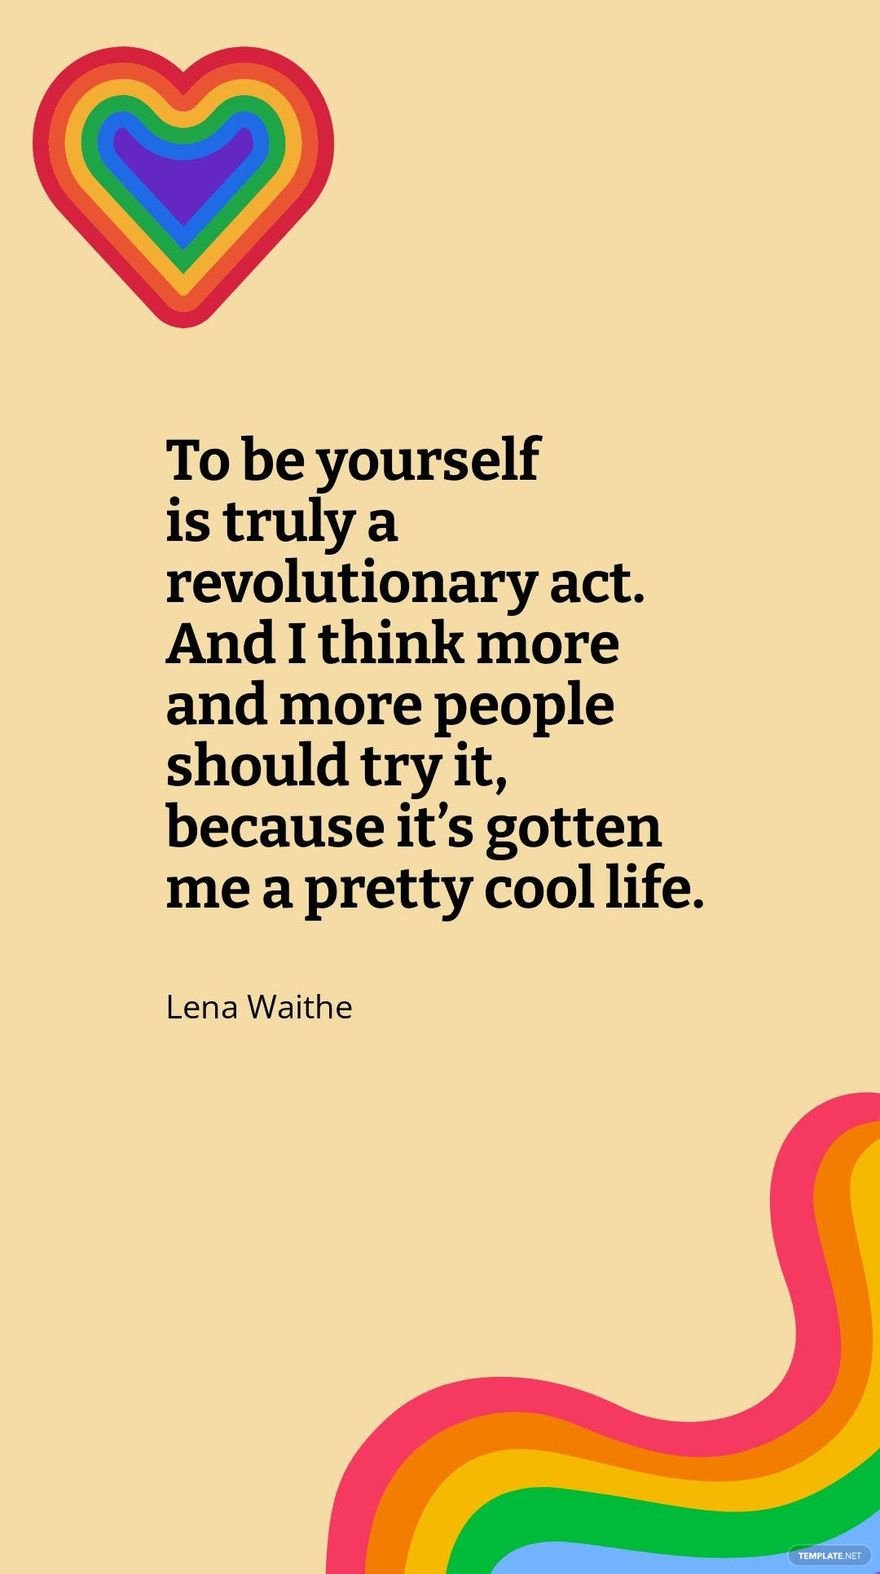 Lena Waithe - To be yourself is truly a revolutionary act. And I think more and more people should try it, because it’s gotten me a pretty cool life. 